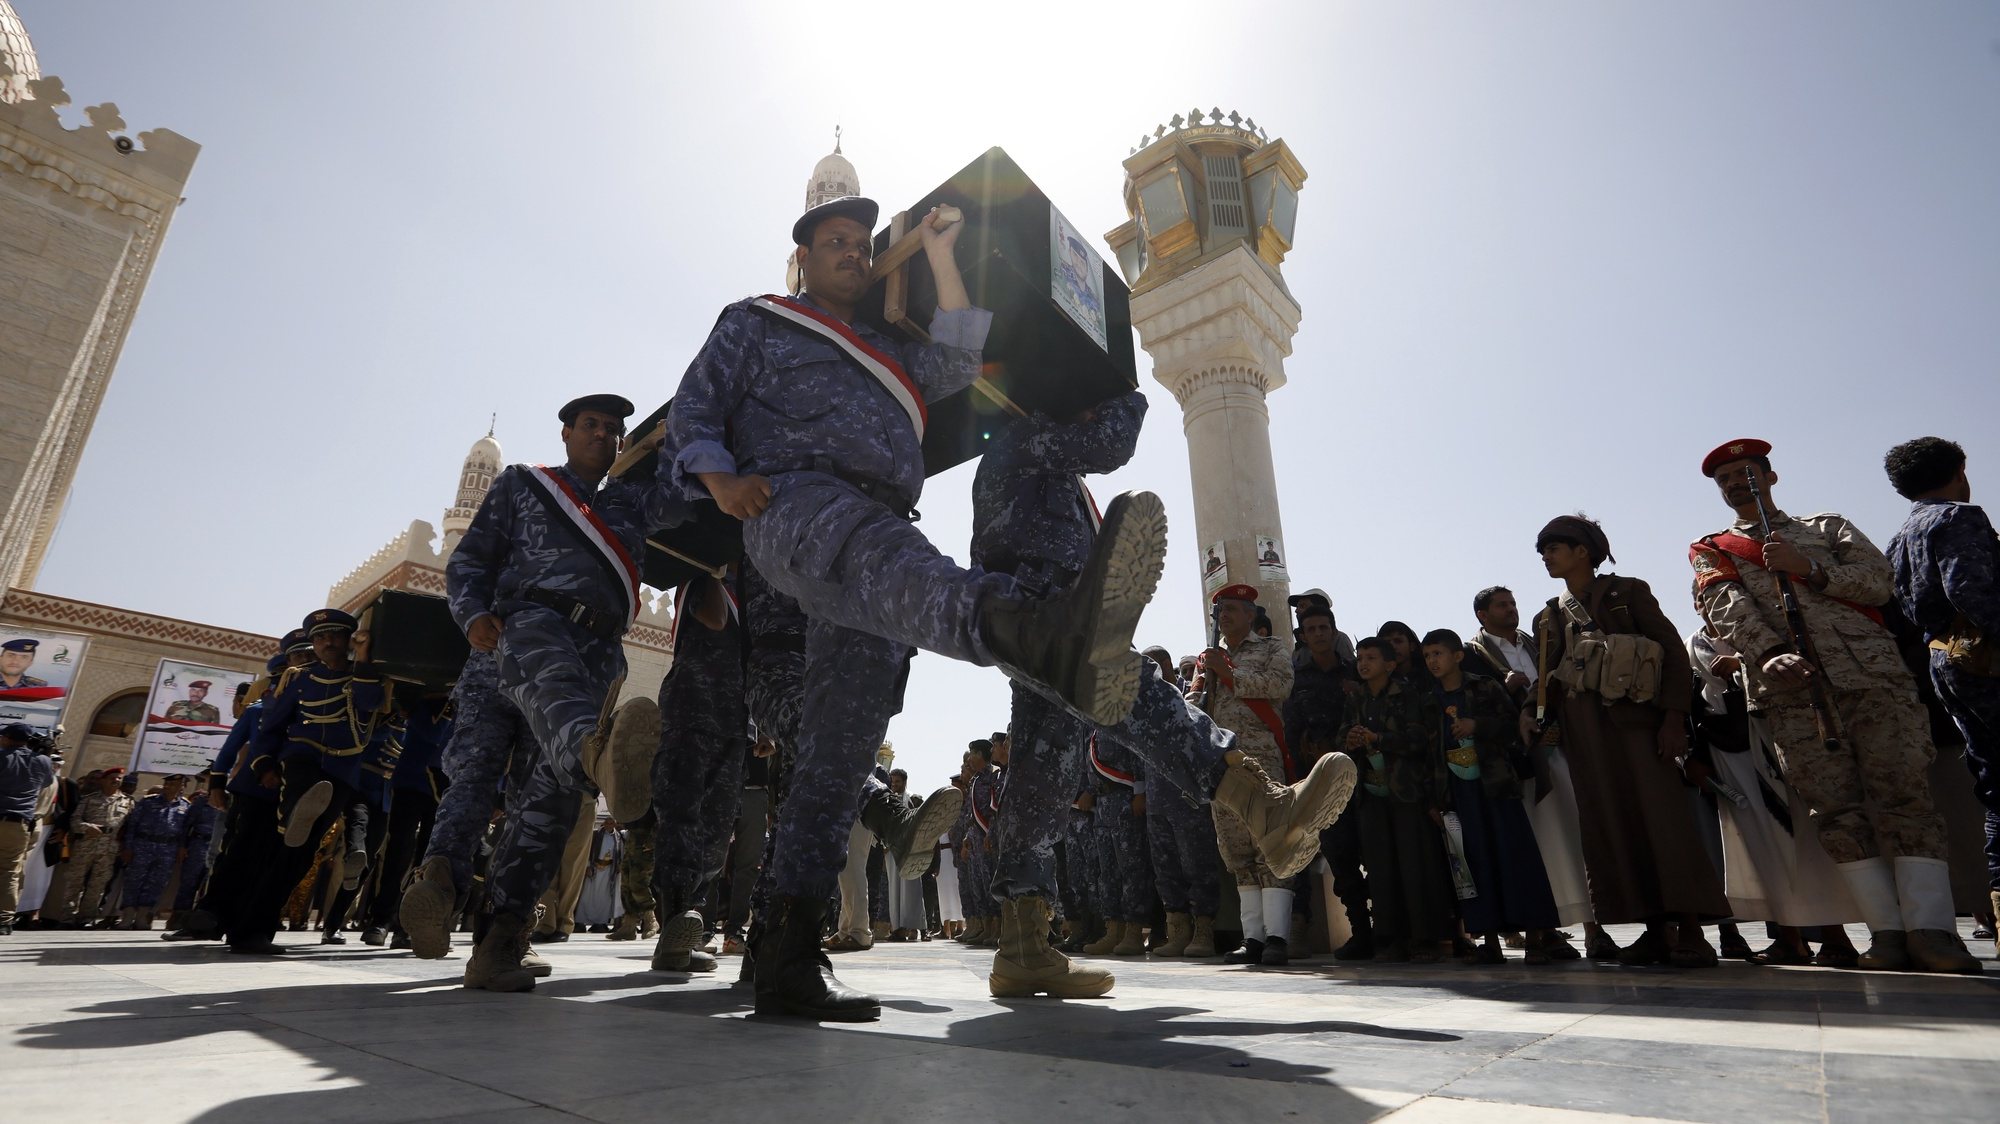 epa09091201 Pro-Houthi soldiers carry the coffins of slain Houthi fighters during a funeral procession a day after a Yemen peace initiative was offered by Saudi Arabia, in Sana&#039;a, Yemen, 23 March 2021. Saudi Arabia has offered a peace initiative to the Houthis in Yemen, including a ceasefire and the reopening of Sana’a airport. A Saudi-led coalition has been fighting the Houthis since March 2015.  EPA/YAHYA ARHAB